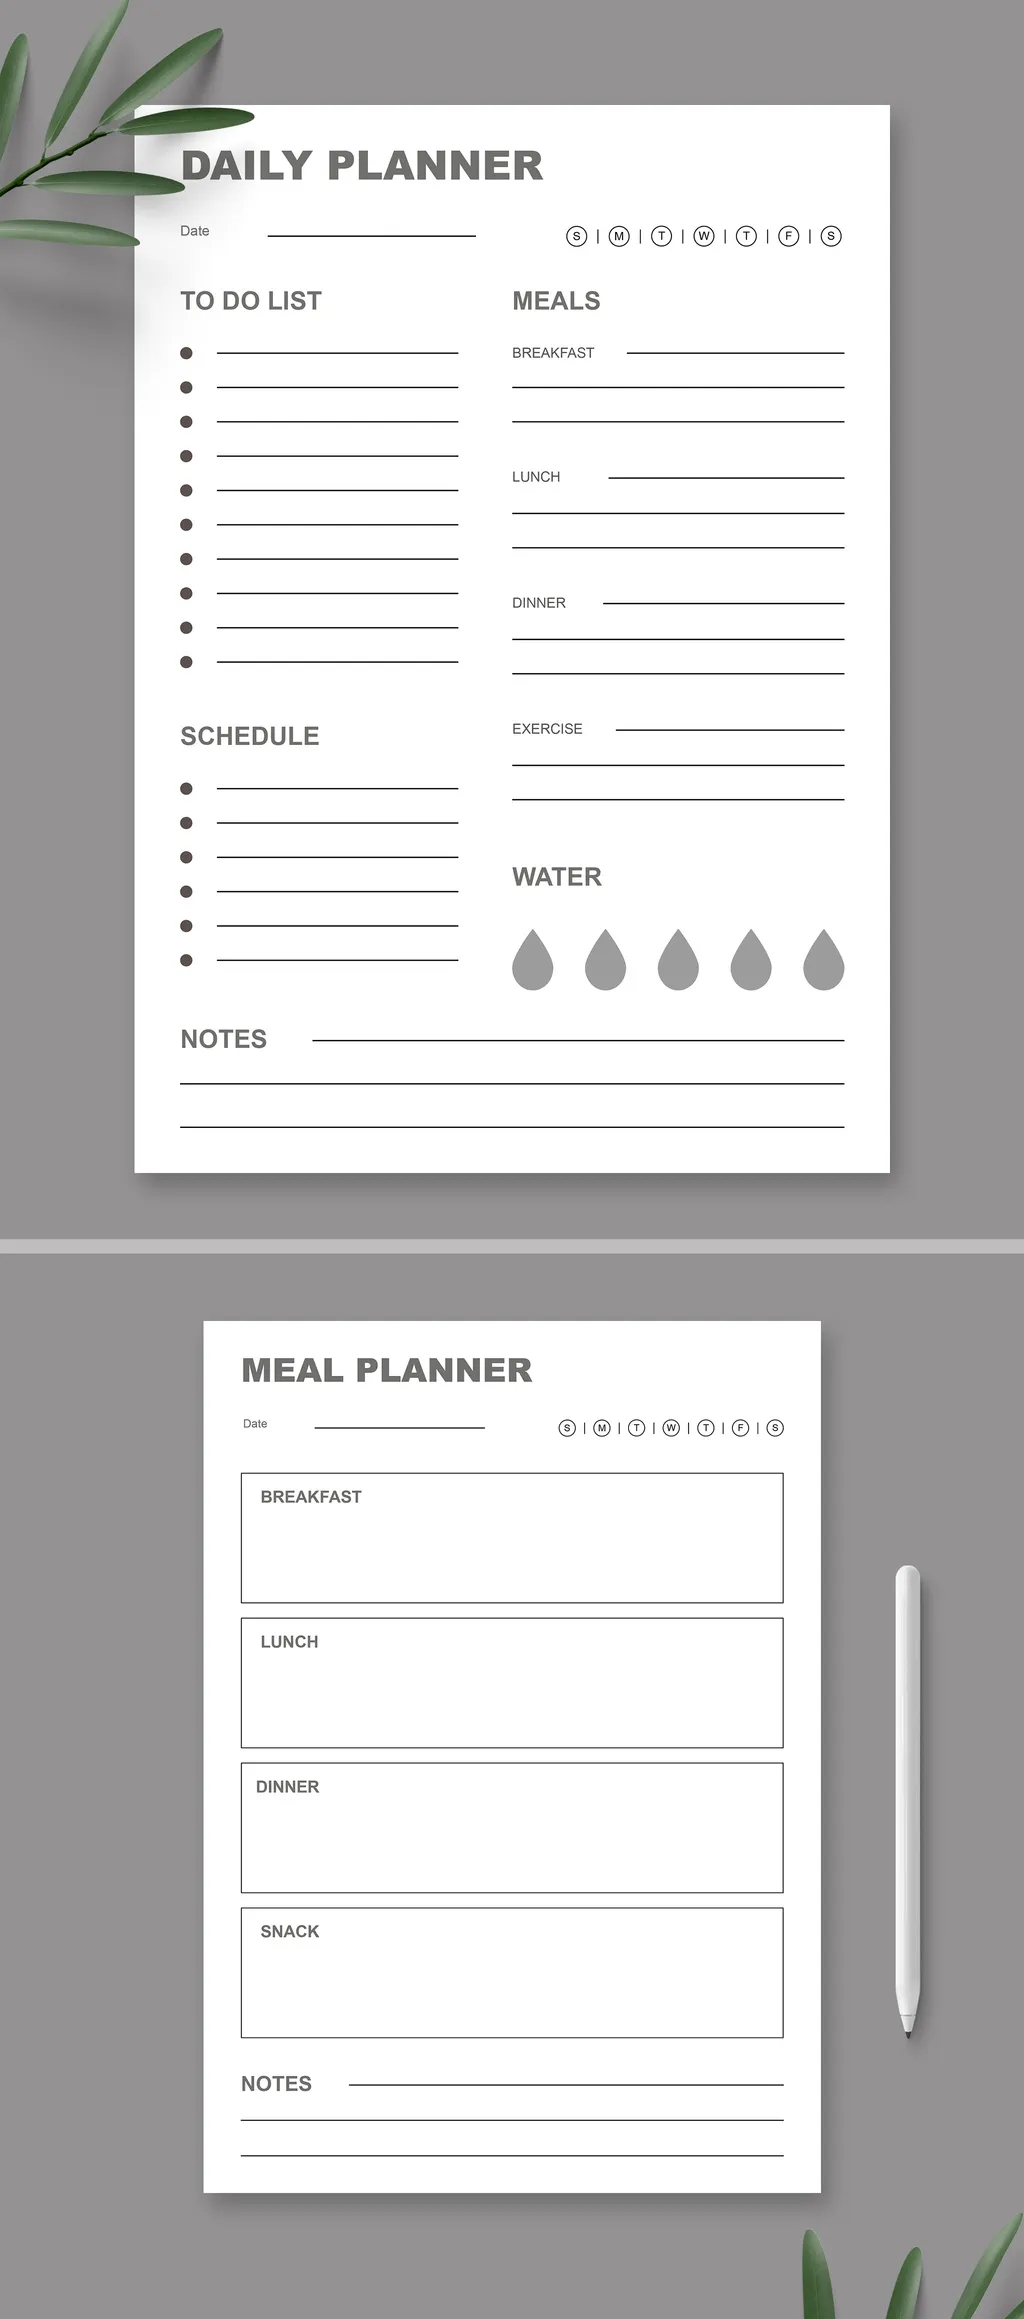 Adobestock - Daily Planner Template Layout 721267867